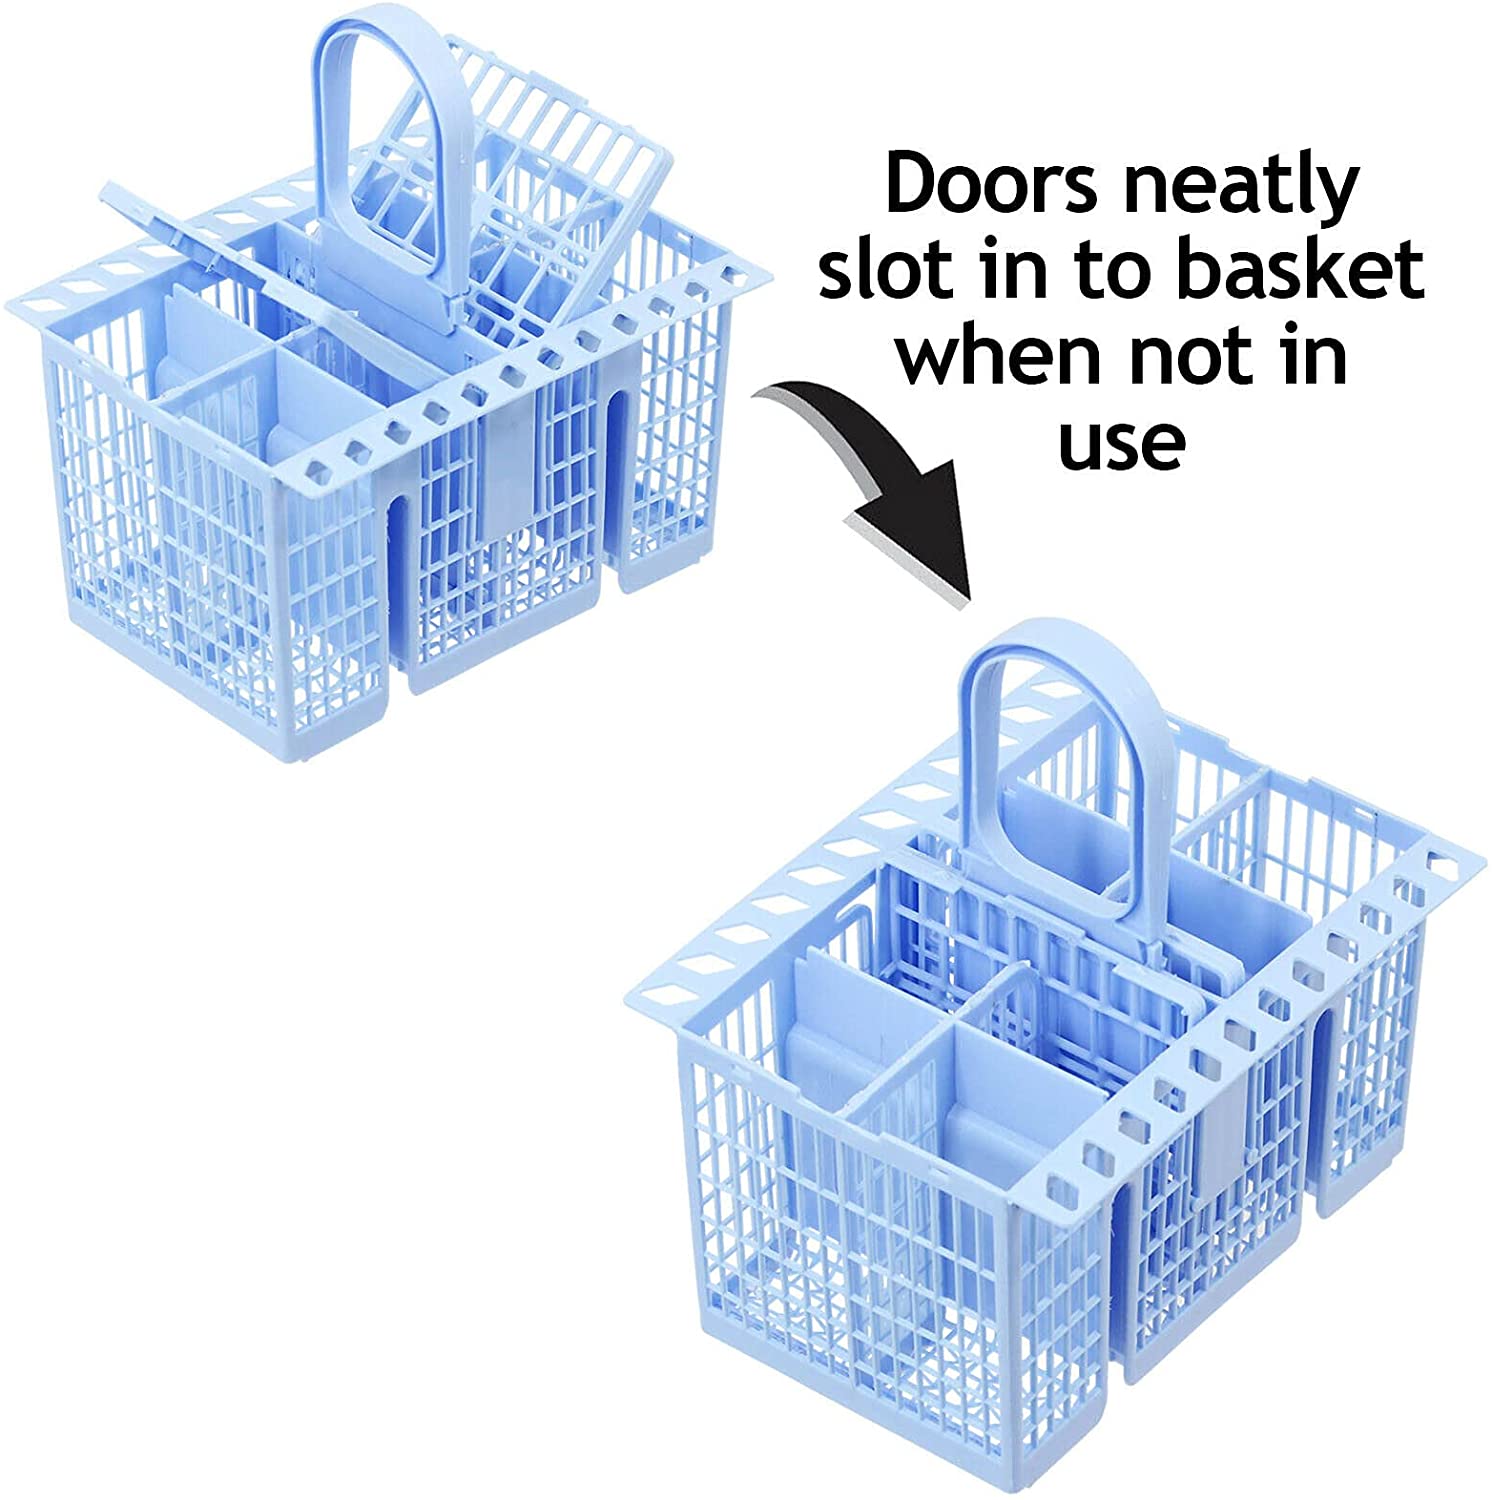 SPARES2GO Cutlery Basket compatible with Grundig Dishwasher (Blue, 220 x 208 x 160mm)